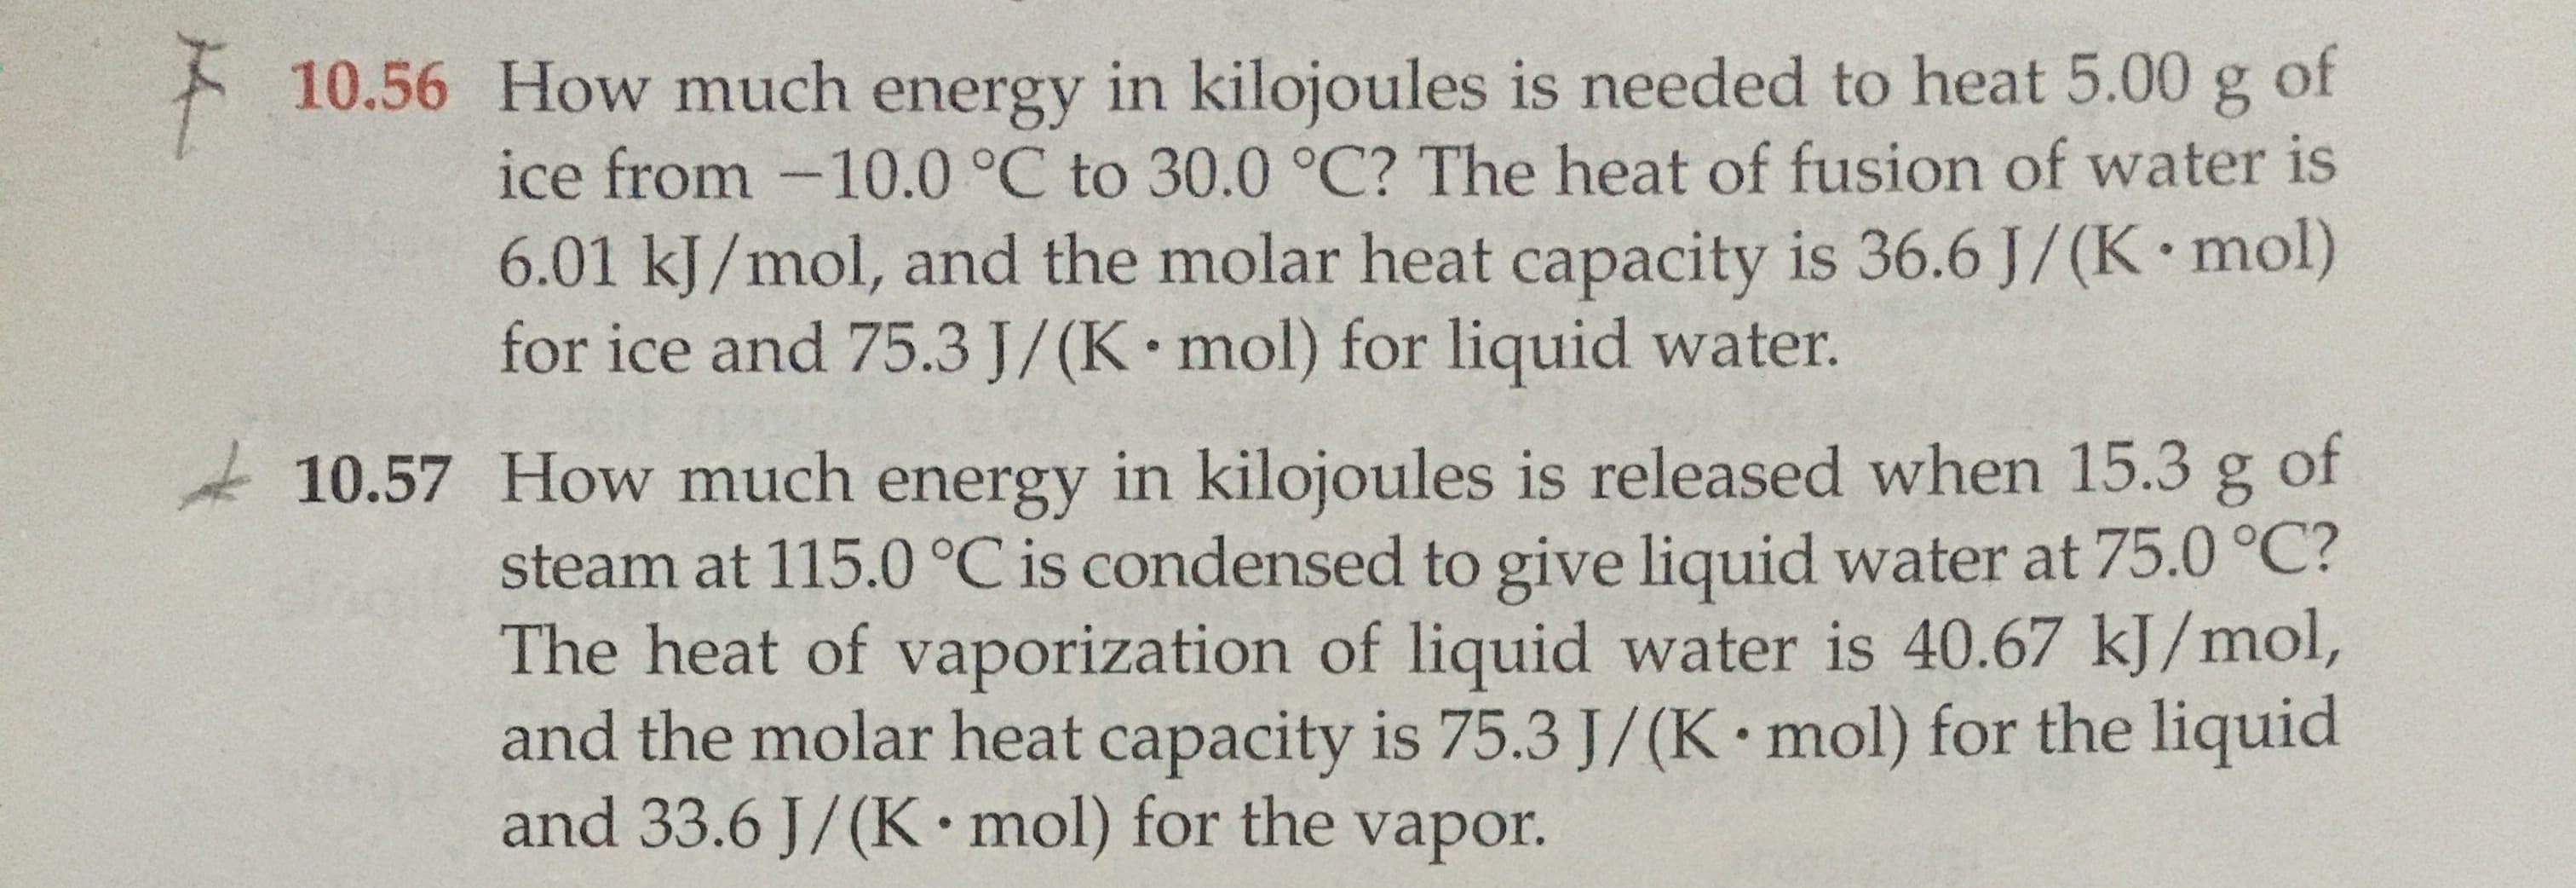 10.56 How much energy in kilojoules is needed to heat 5.00 g of
ice from -10.0 °C to 30.0 °C? The heat of fusion of water is
6.01 kJ/mol, and the molar heat capacity is 36.6 J/(K mol)
for ice and 75.3 J/(K mol) for liquid water.
10.57 How much energy in kilojoules is released when 15.3 g of
steam at 115.0 °C is condensed to give liquid water at 75.0 °C?
The heat of vaporization of liquid water is 40.67 kJ/mol,
and the molar heat capacity is 75.3 J/(K mol) for the liquid
and 33.6 J/(K•mol) for the vapor.
